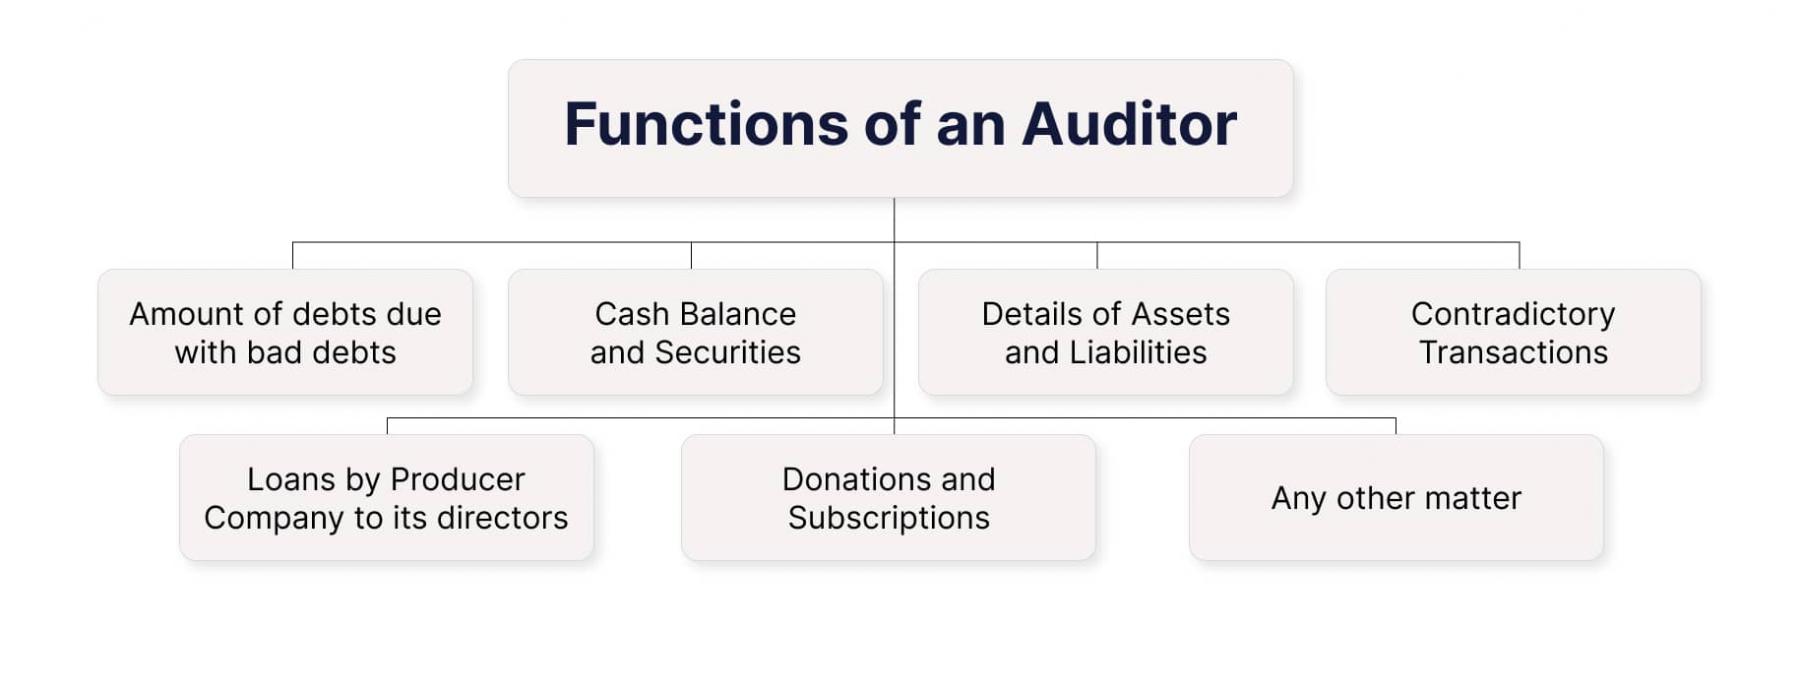 Functions of an Auditor